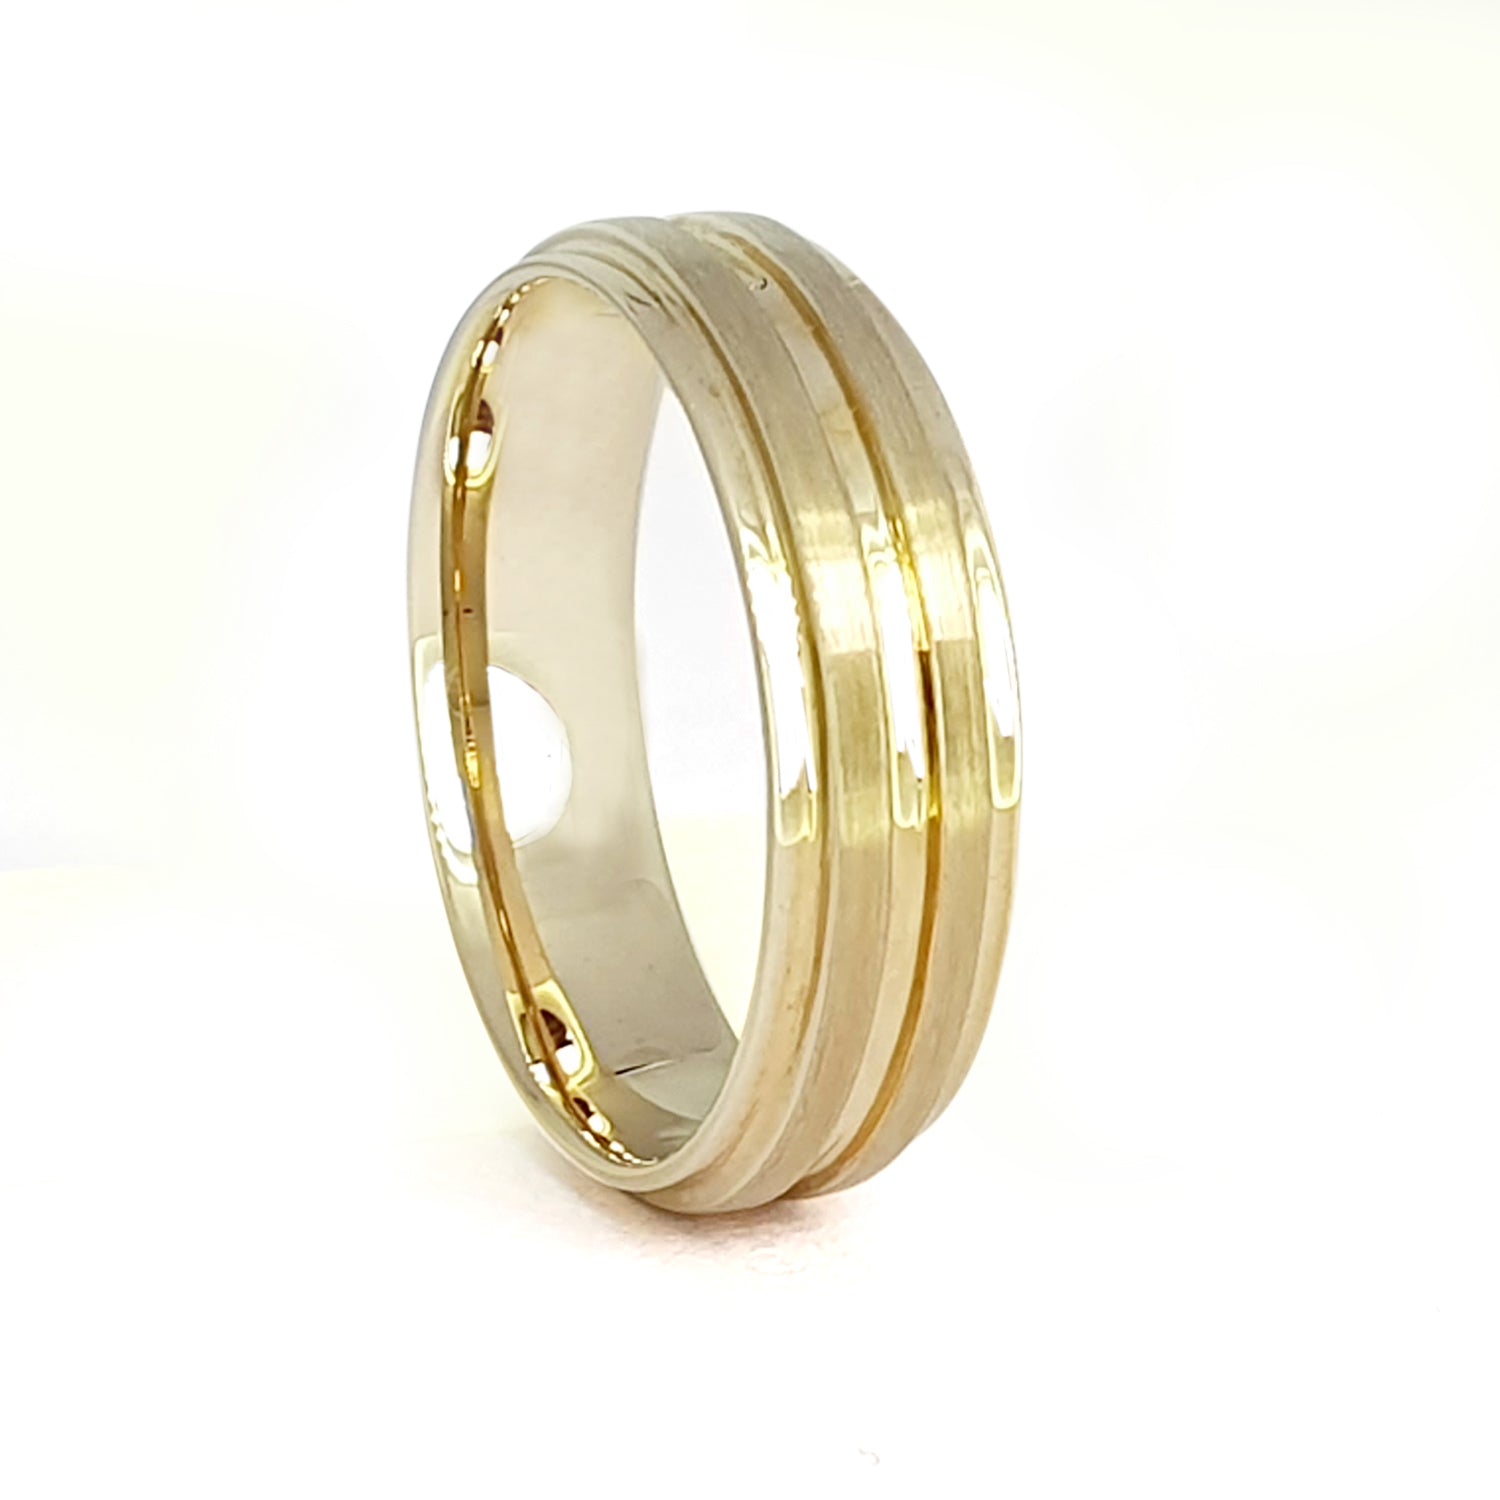 White Gold Wedding Rings | 14k White Gold Rings | Meicel Jewelry Store